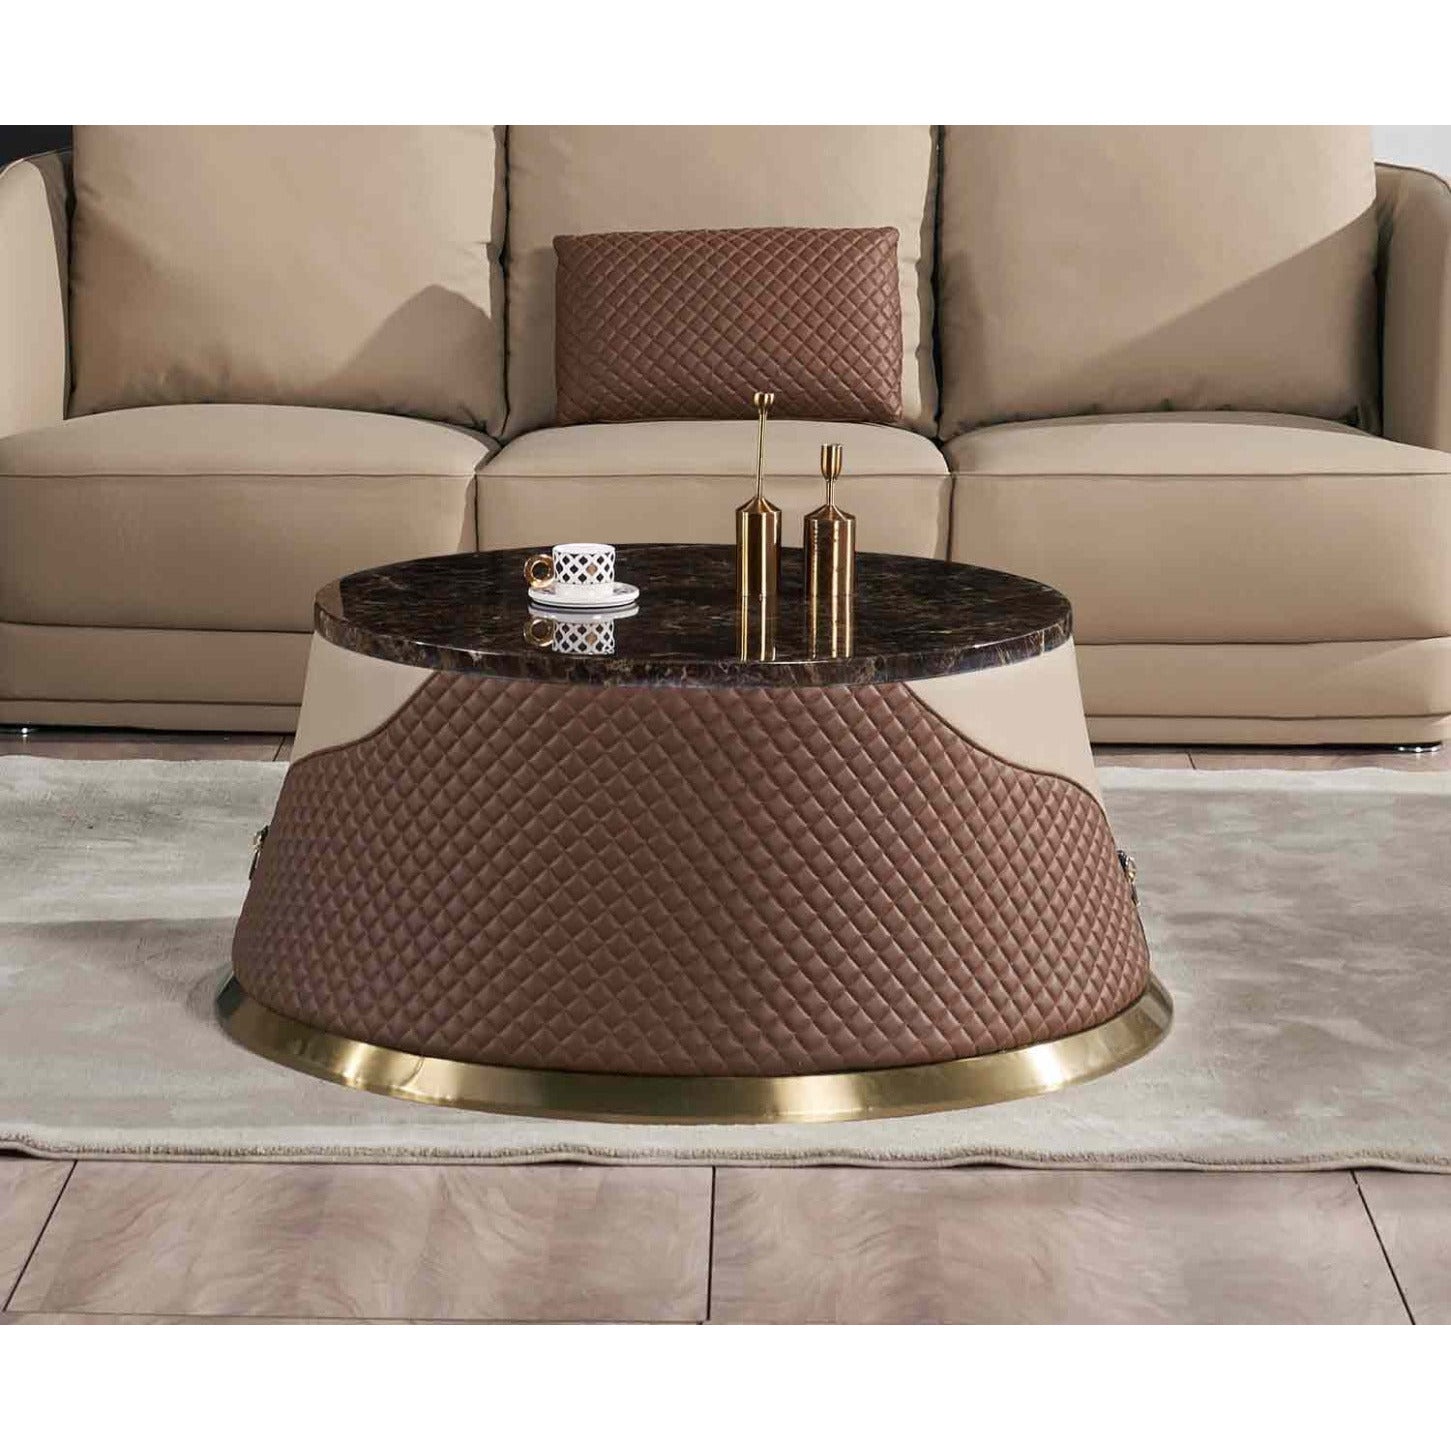 European Furniture - Glamour Coffee Table in Tan-Brown - 51617-CT - New Star Living